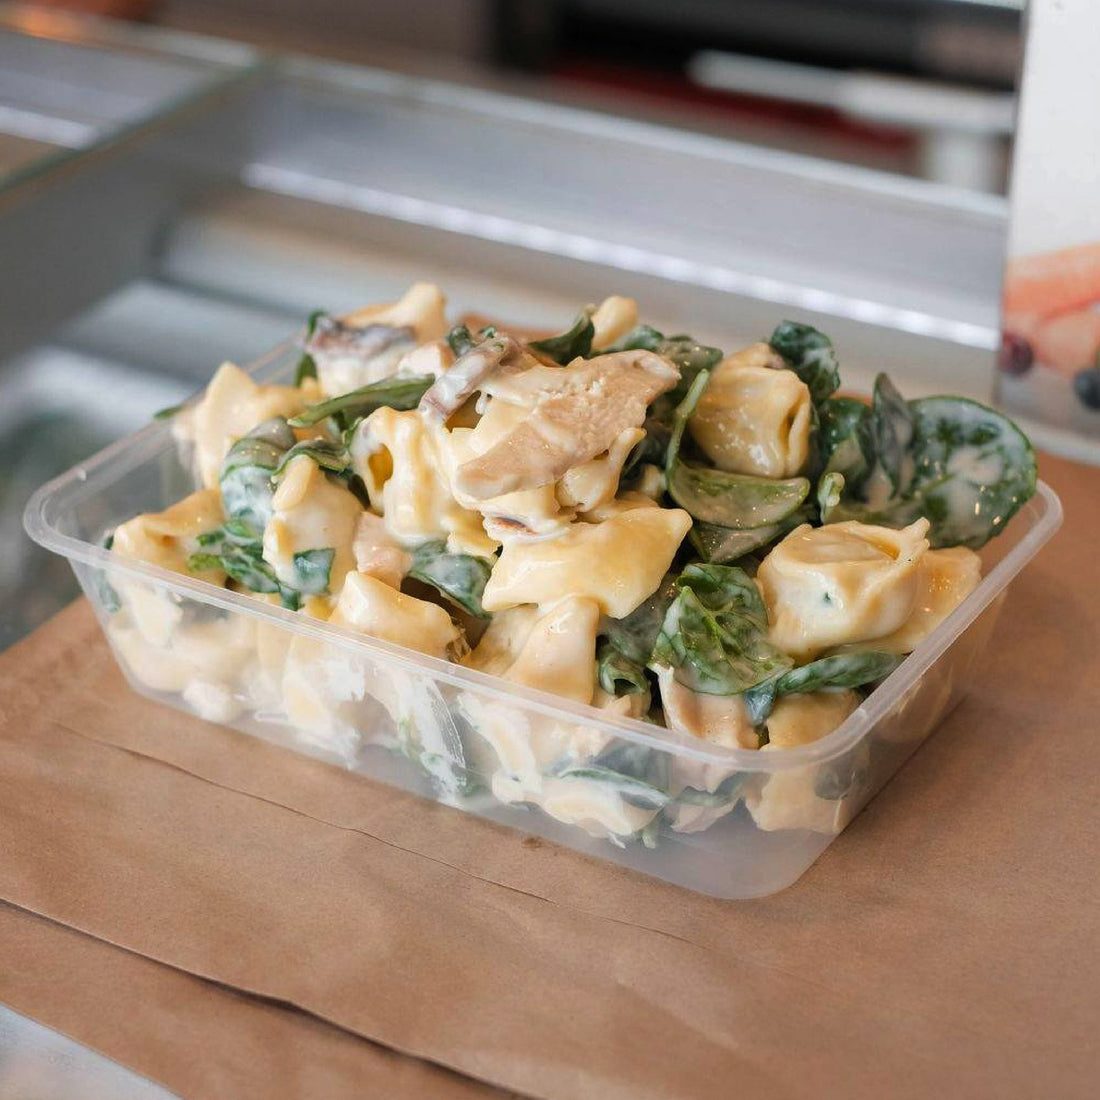 creamy chicken and spinach leftovers placed in a plastic food container